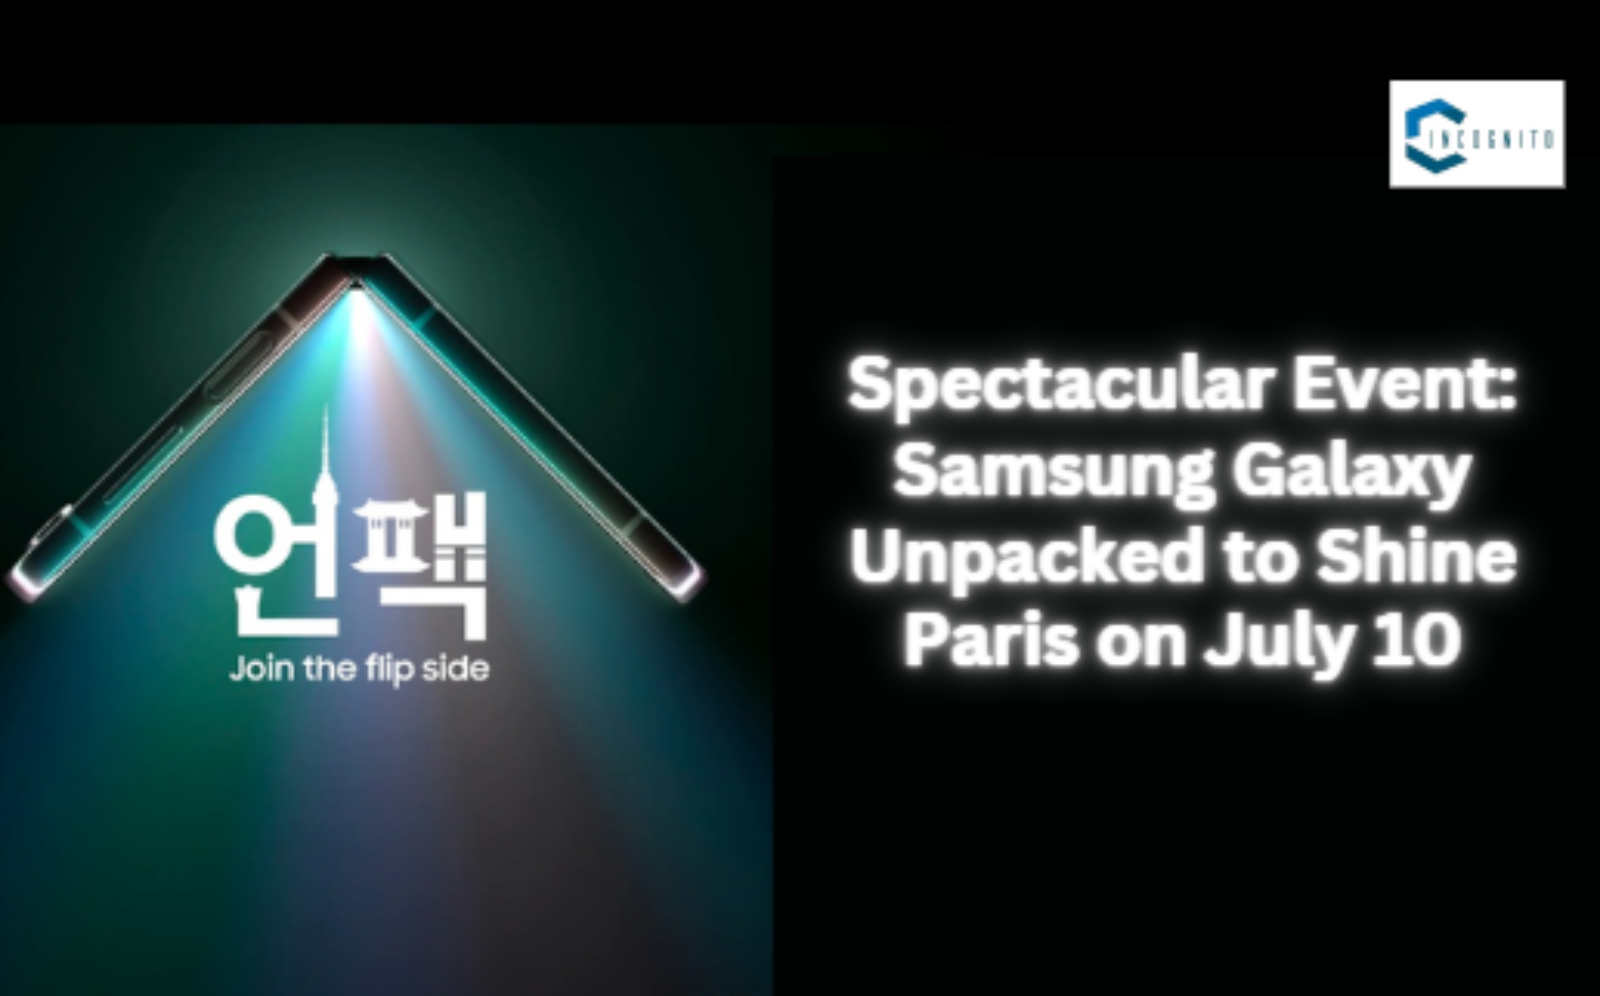 Spectacular Event: Samsung Galaxy Unpacked to Shine Paris on July 10